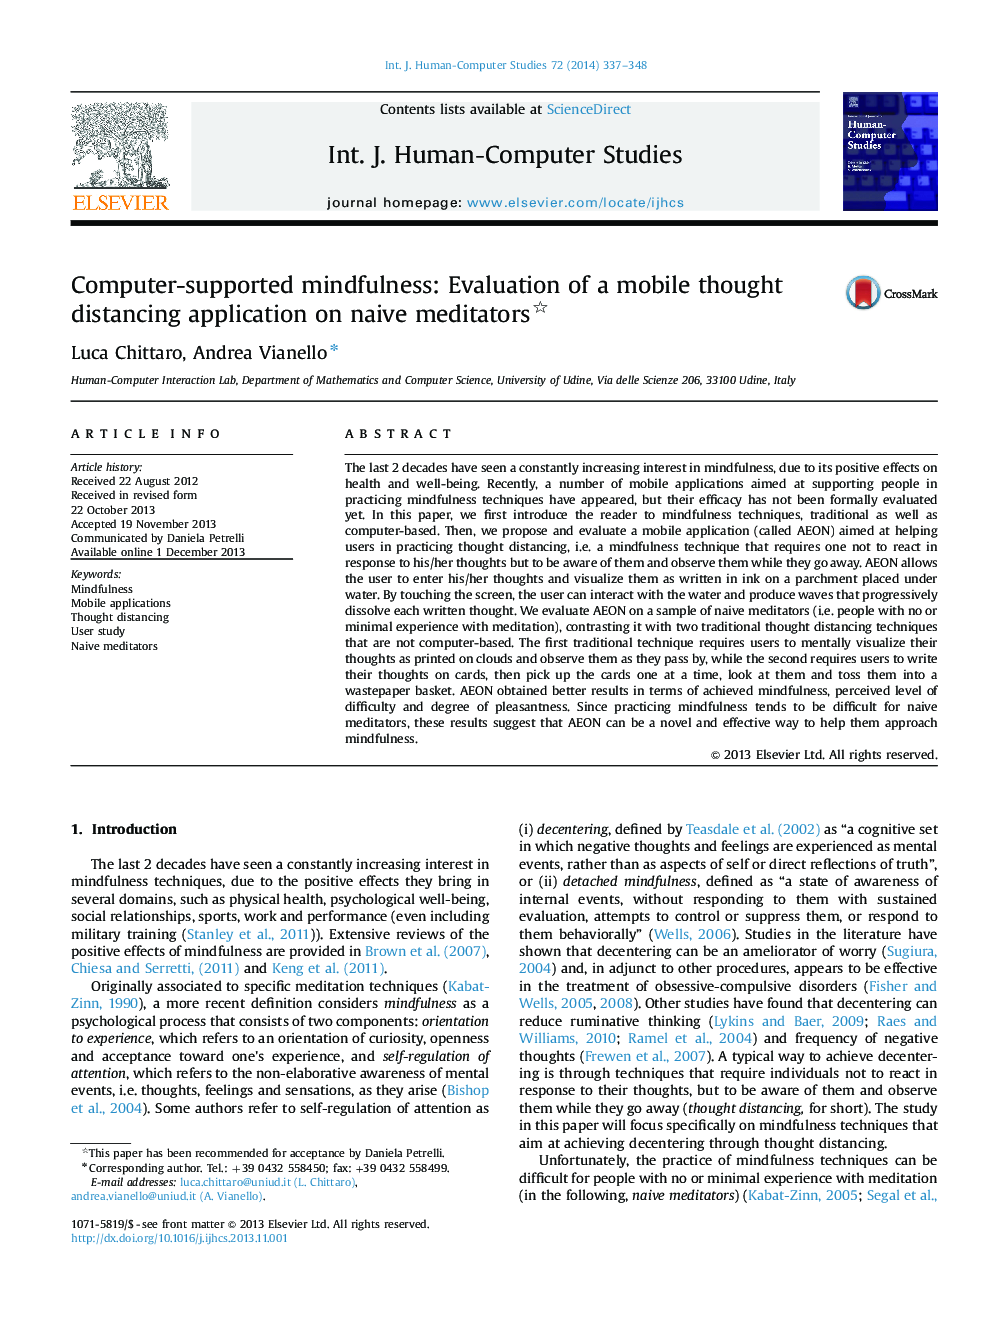 Computer-supported mindfulness: Evaluation of a mobile thought distancing application on naive meditators